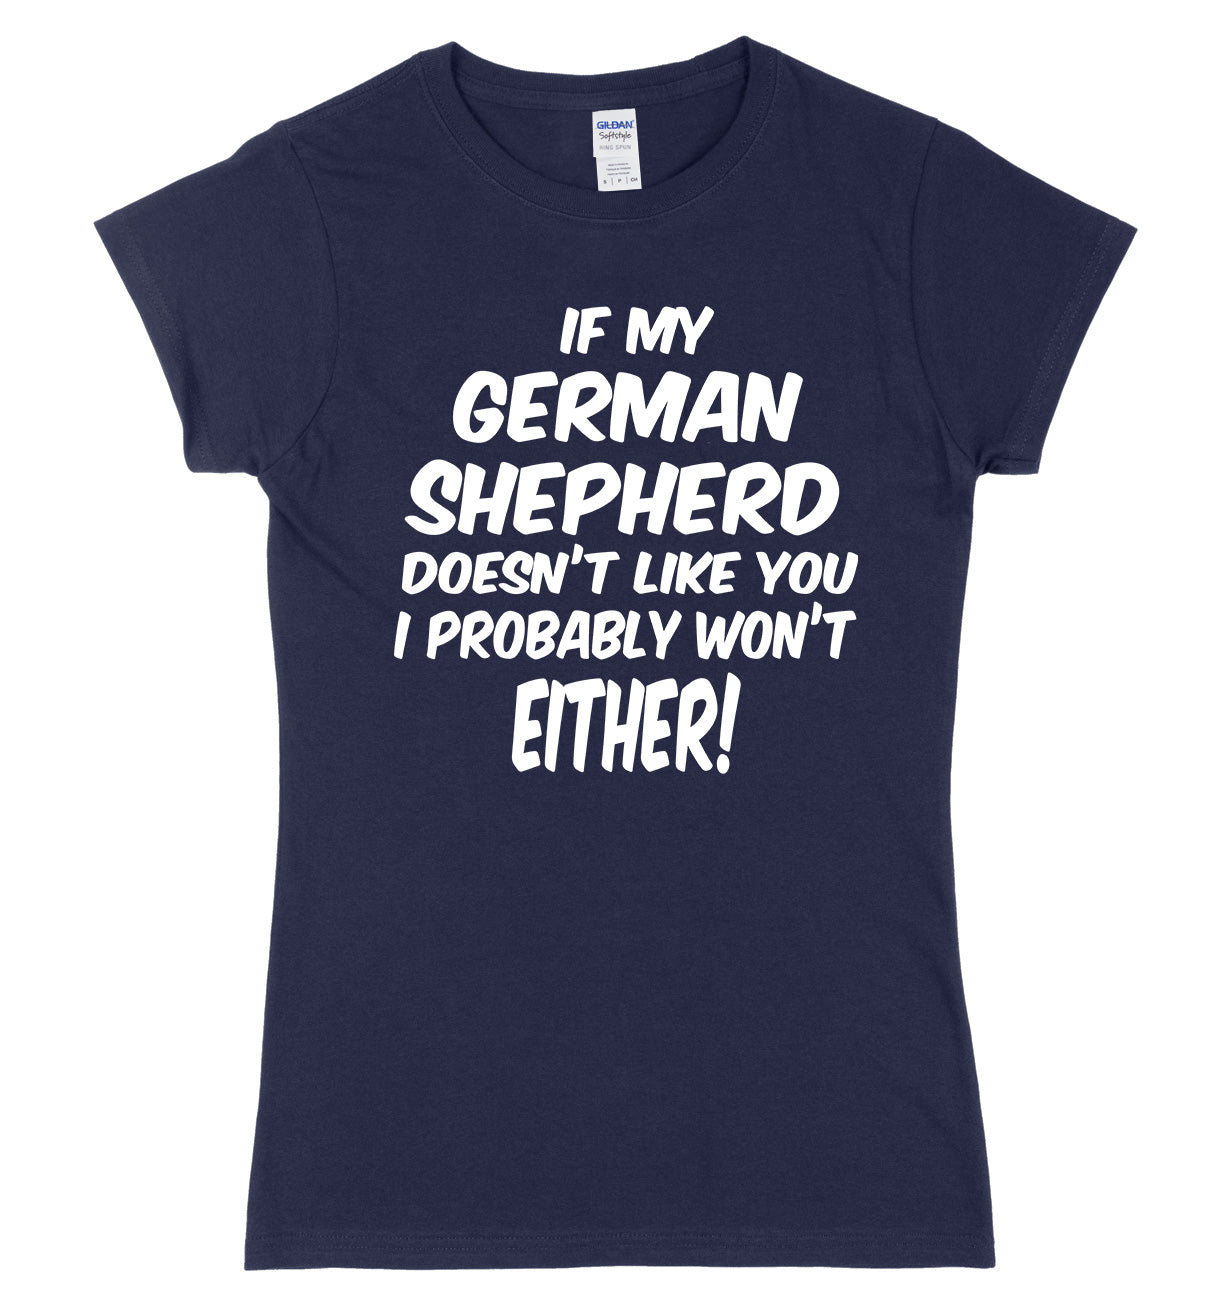 IF MY GERMAN SHEPHERD DOESN'T LIKE YOU I PROBABLY WON'T EITHER FUNNY WOMENS LADIES SLIM FIT  T-SHIRT